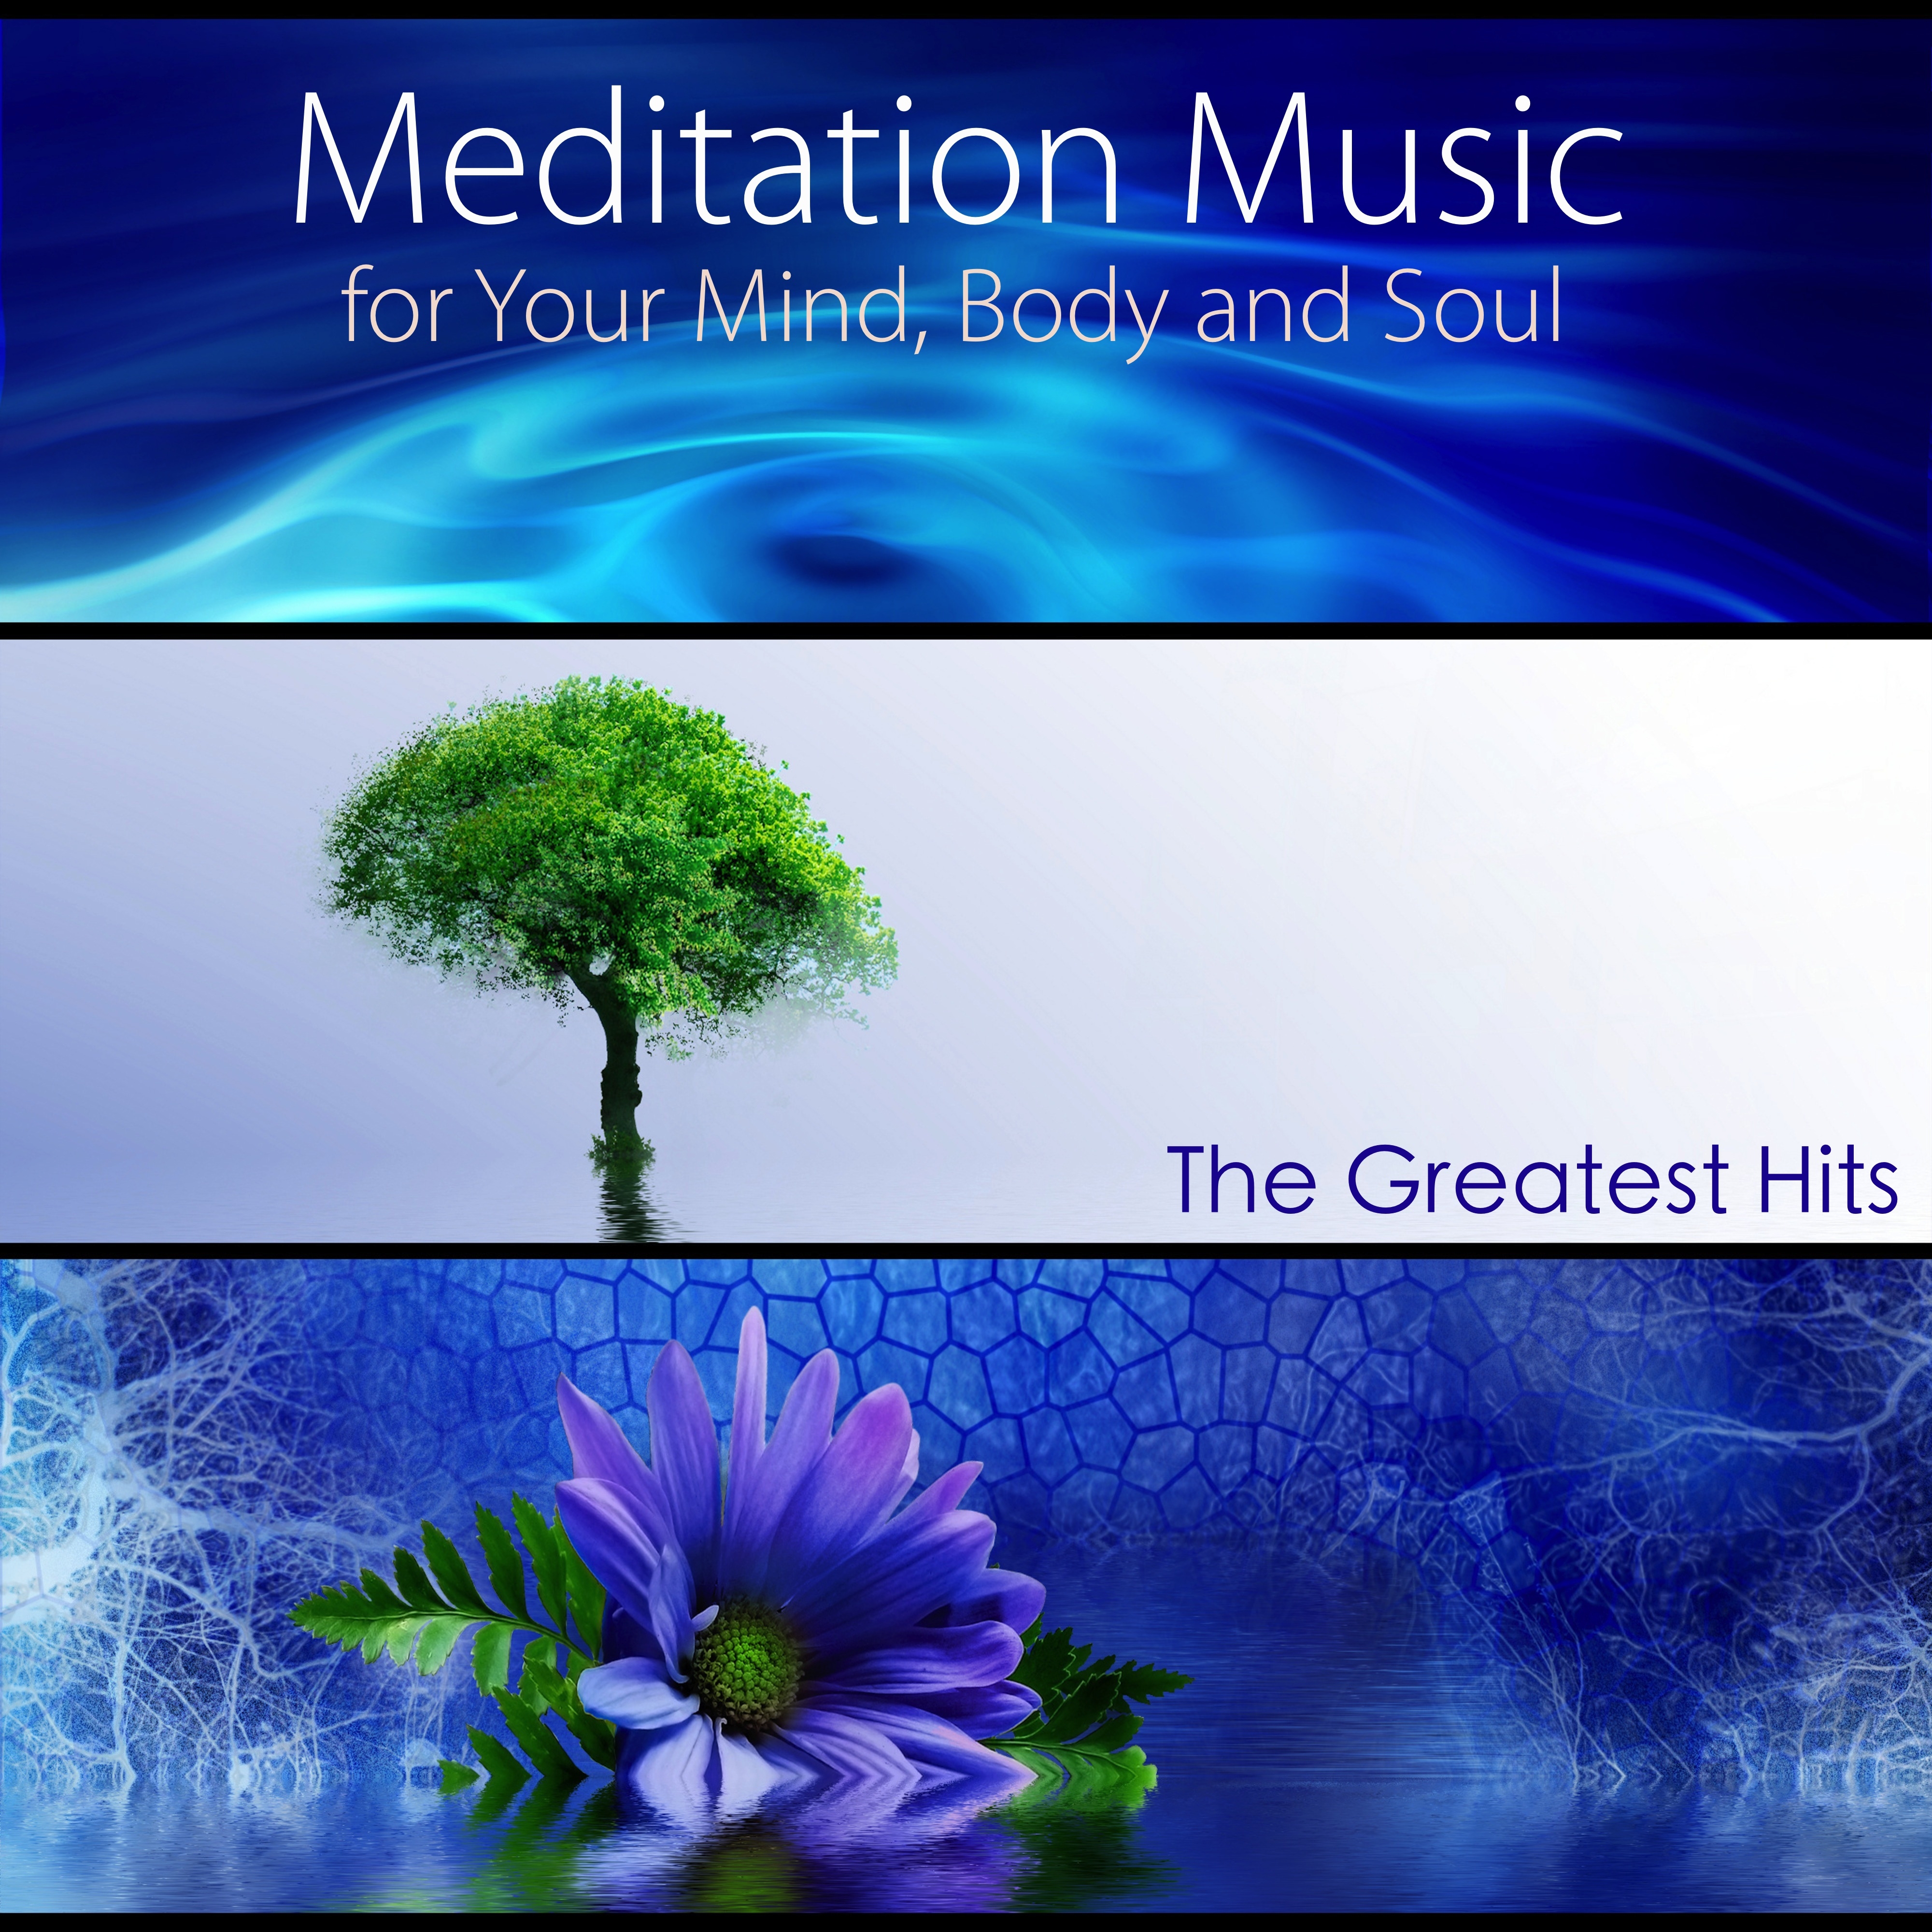 Meditation Music for Your Mind, Body and Soul - The Greatest Hits